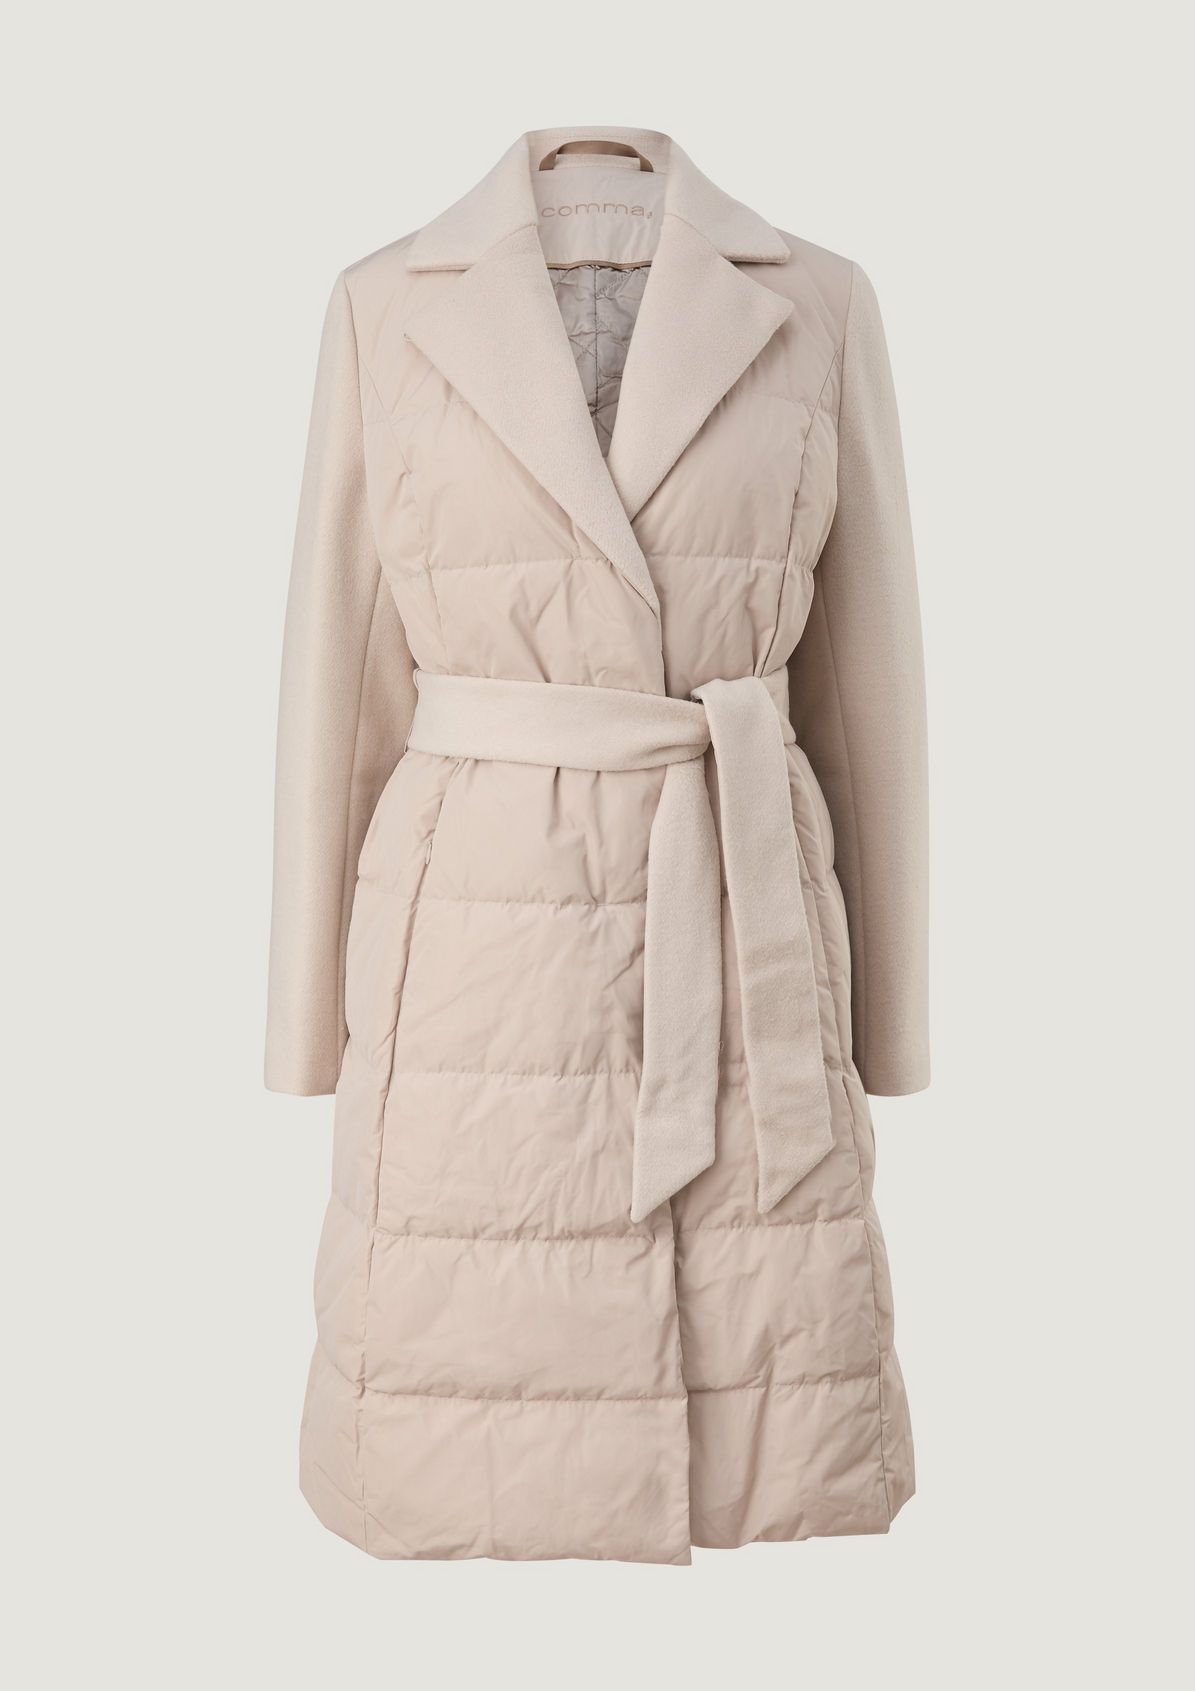 Down coat with a tie-around belt from comma